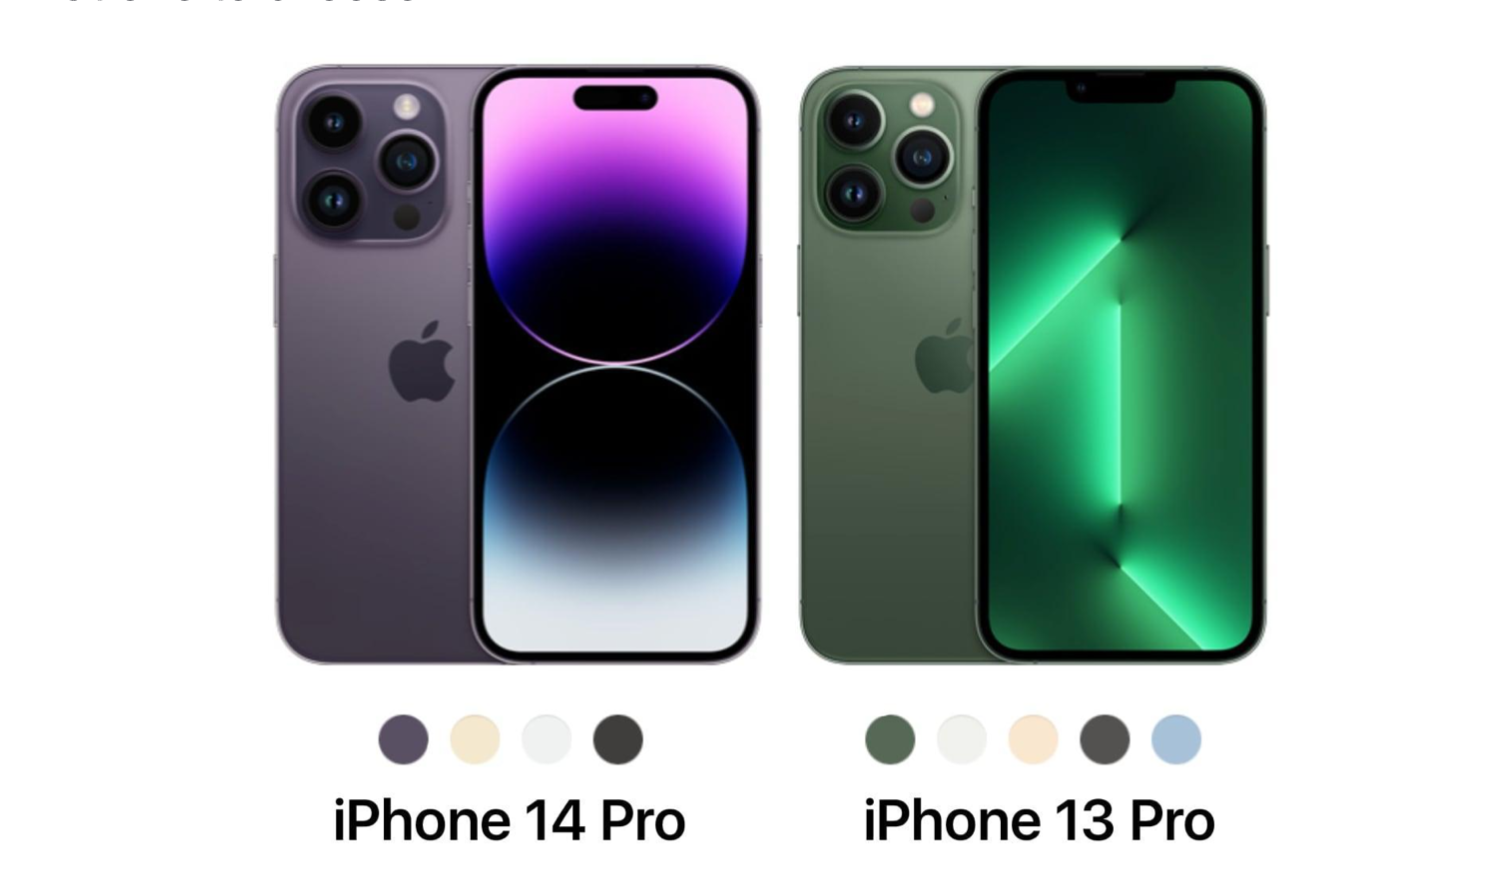 iPhone 13 Pro vs iPhone 14 Pro : What are the Differences in Specs?